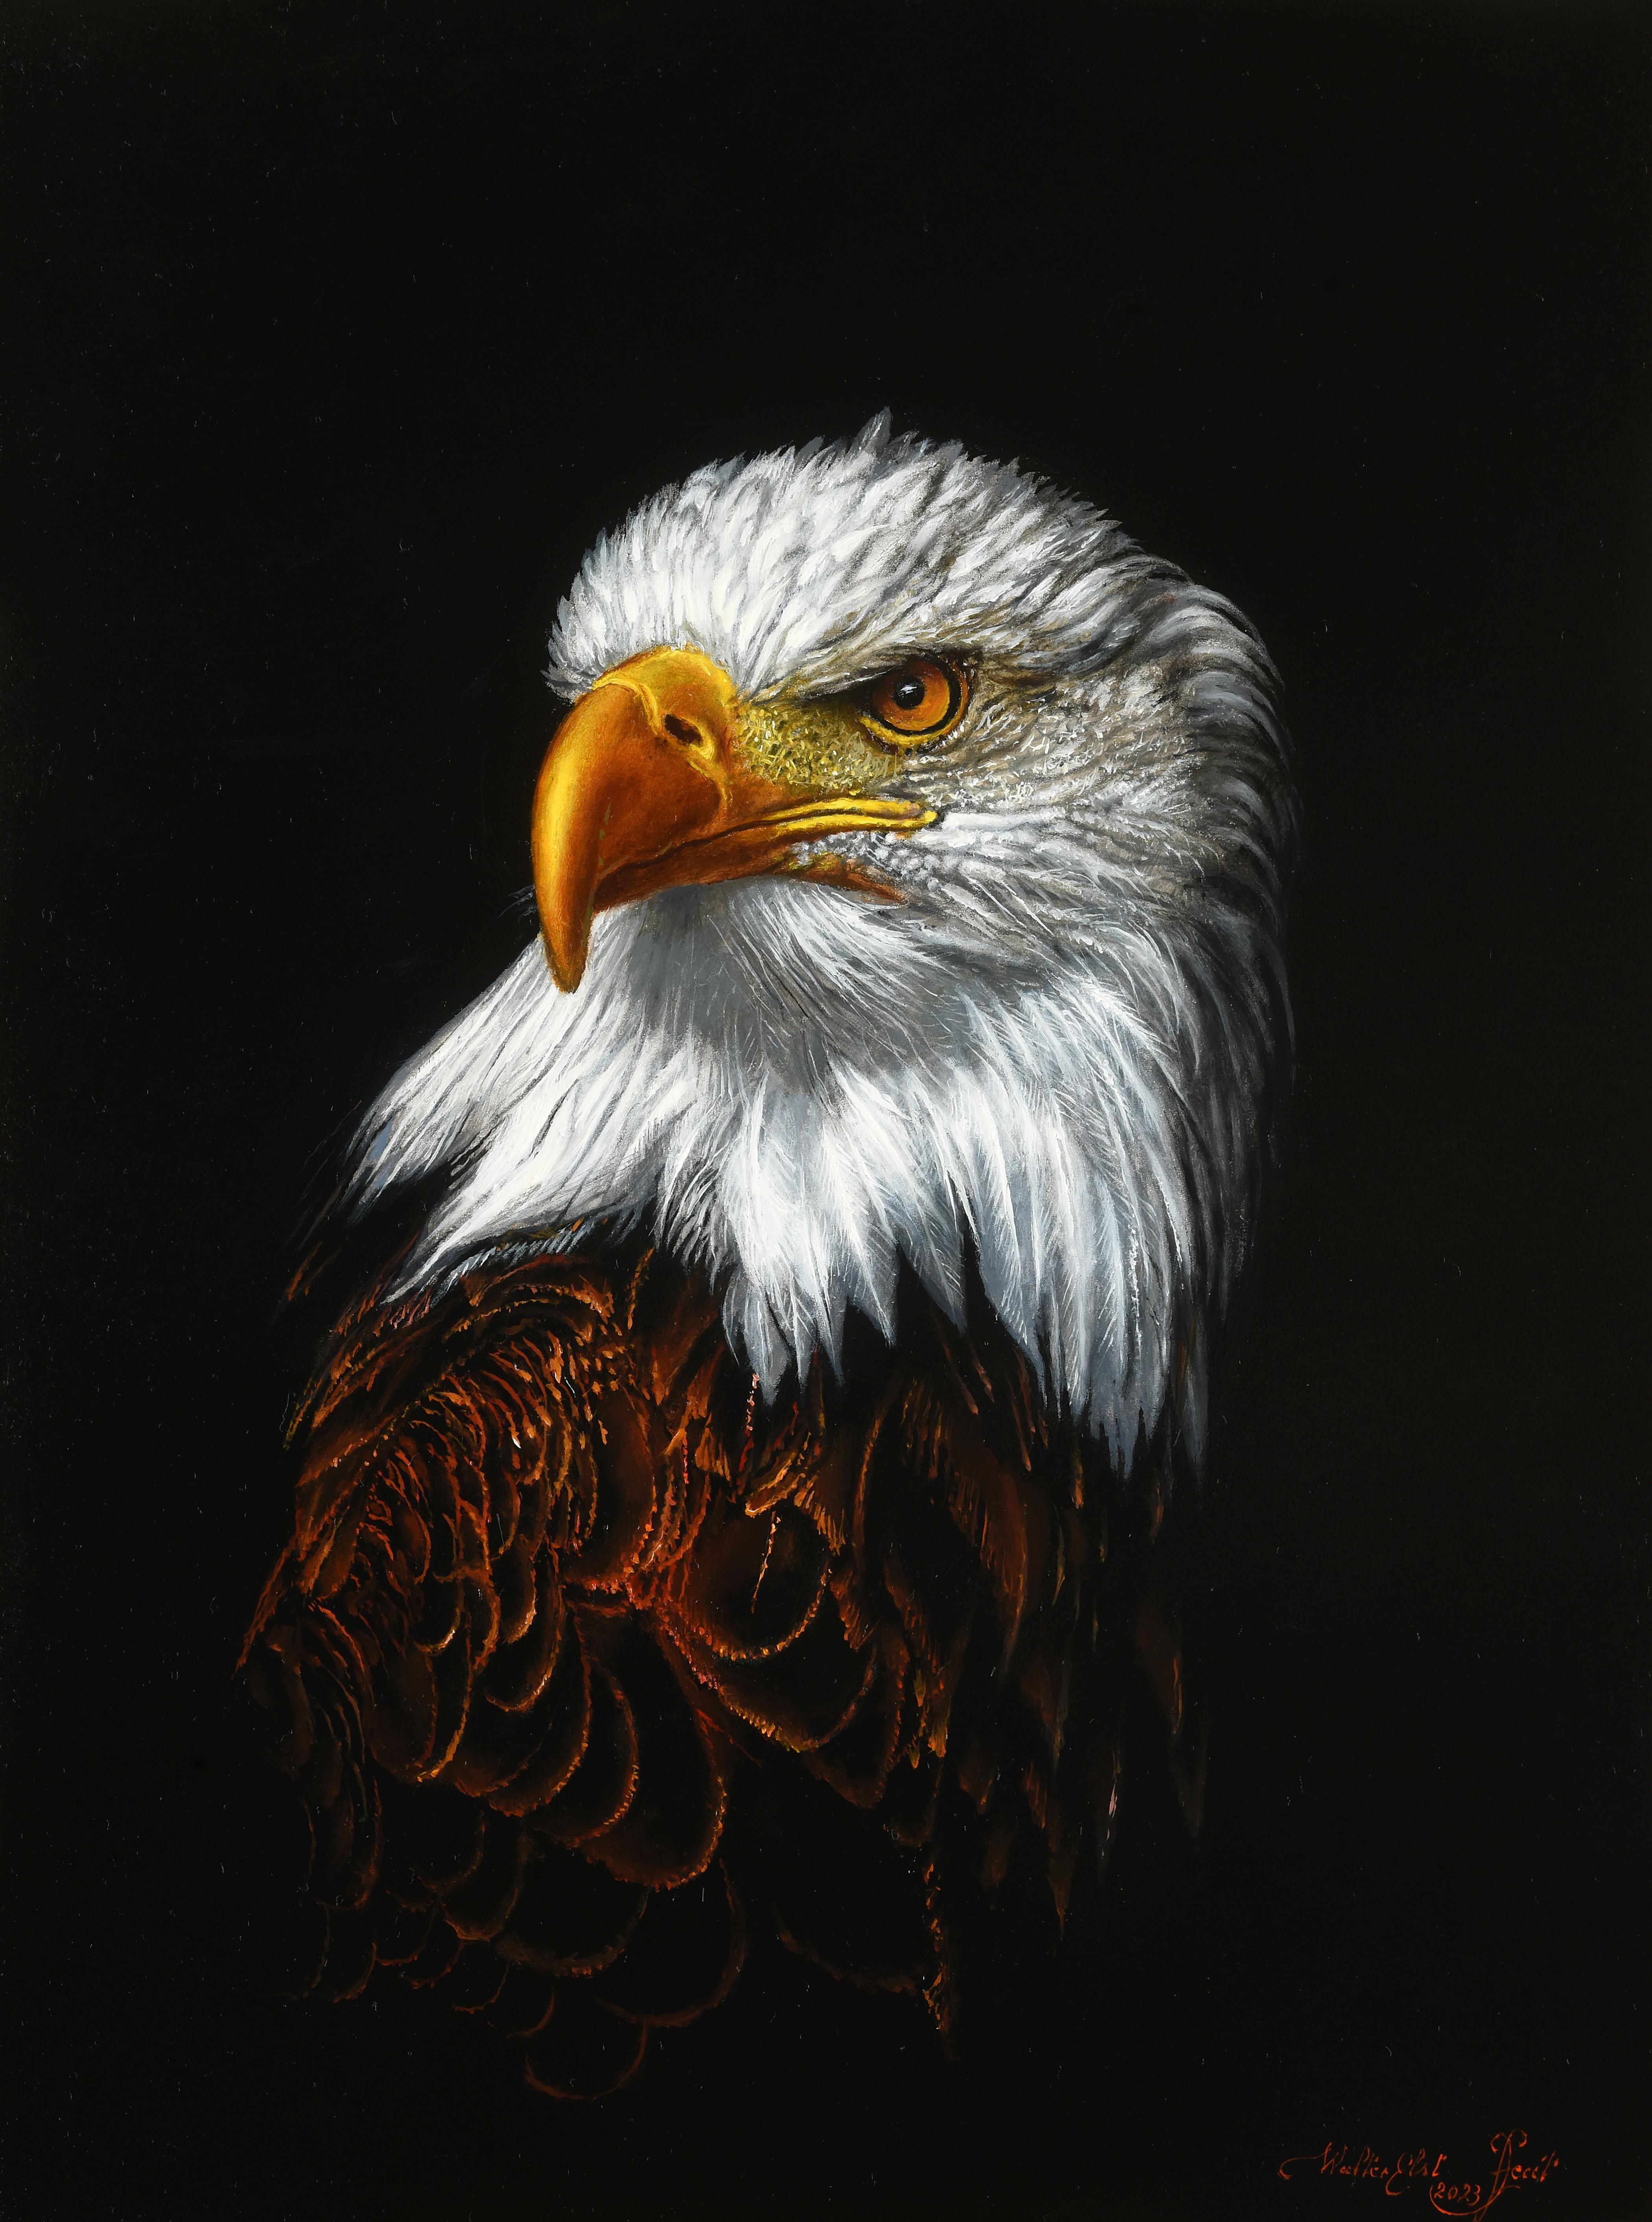 Adelaar Eagle Oil Painting on Panel Birds Wildlife In Stock  - Sizes are measured without frame

Walter Elst Born in Antwerp, Belgium - 1955  After finishing his study Medicine at the University of Brussels Walter Elst decided to dedicate himself to